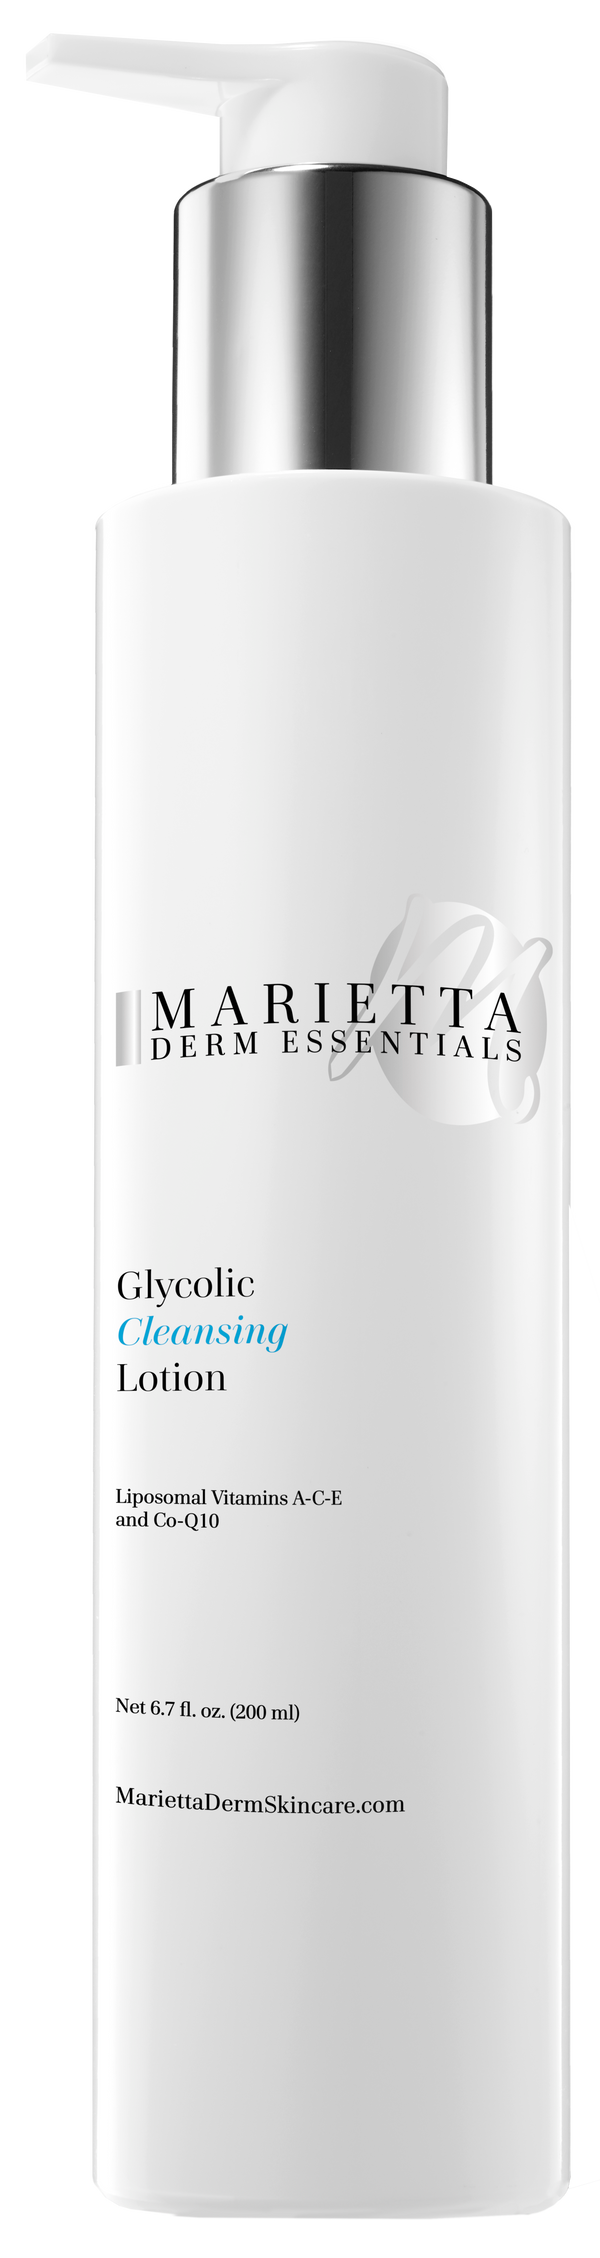 Glycolic Cleansing Lotion